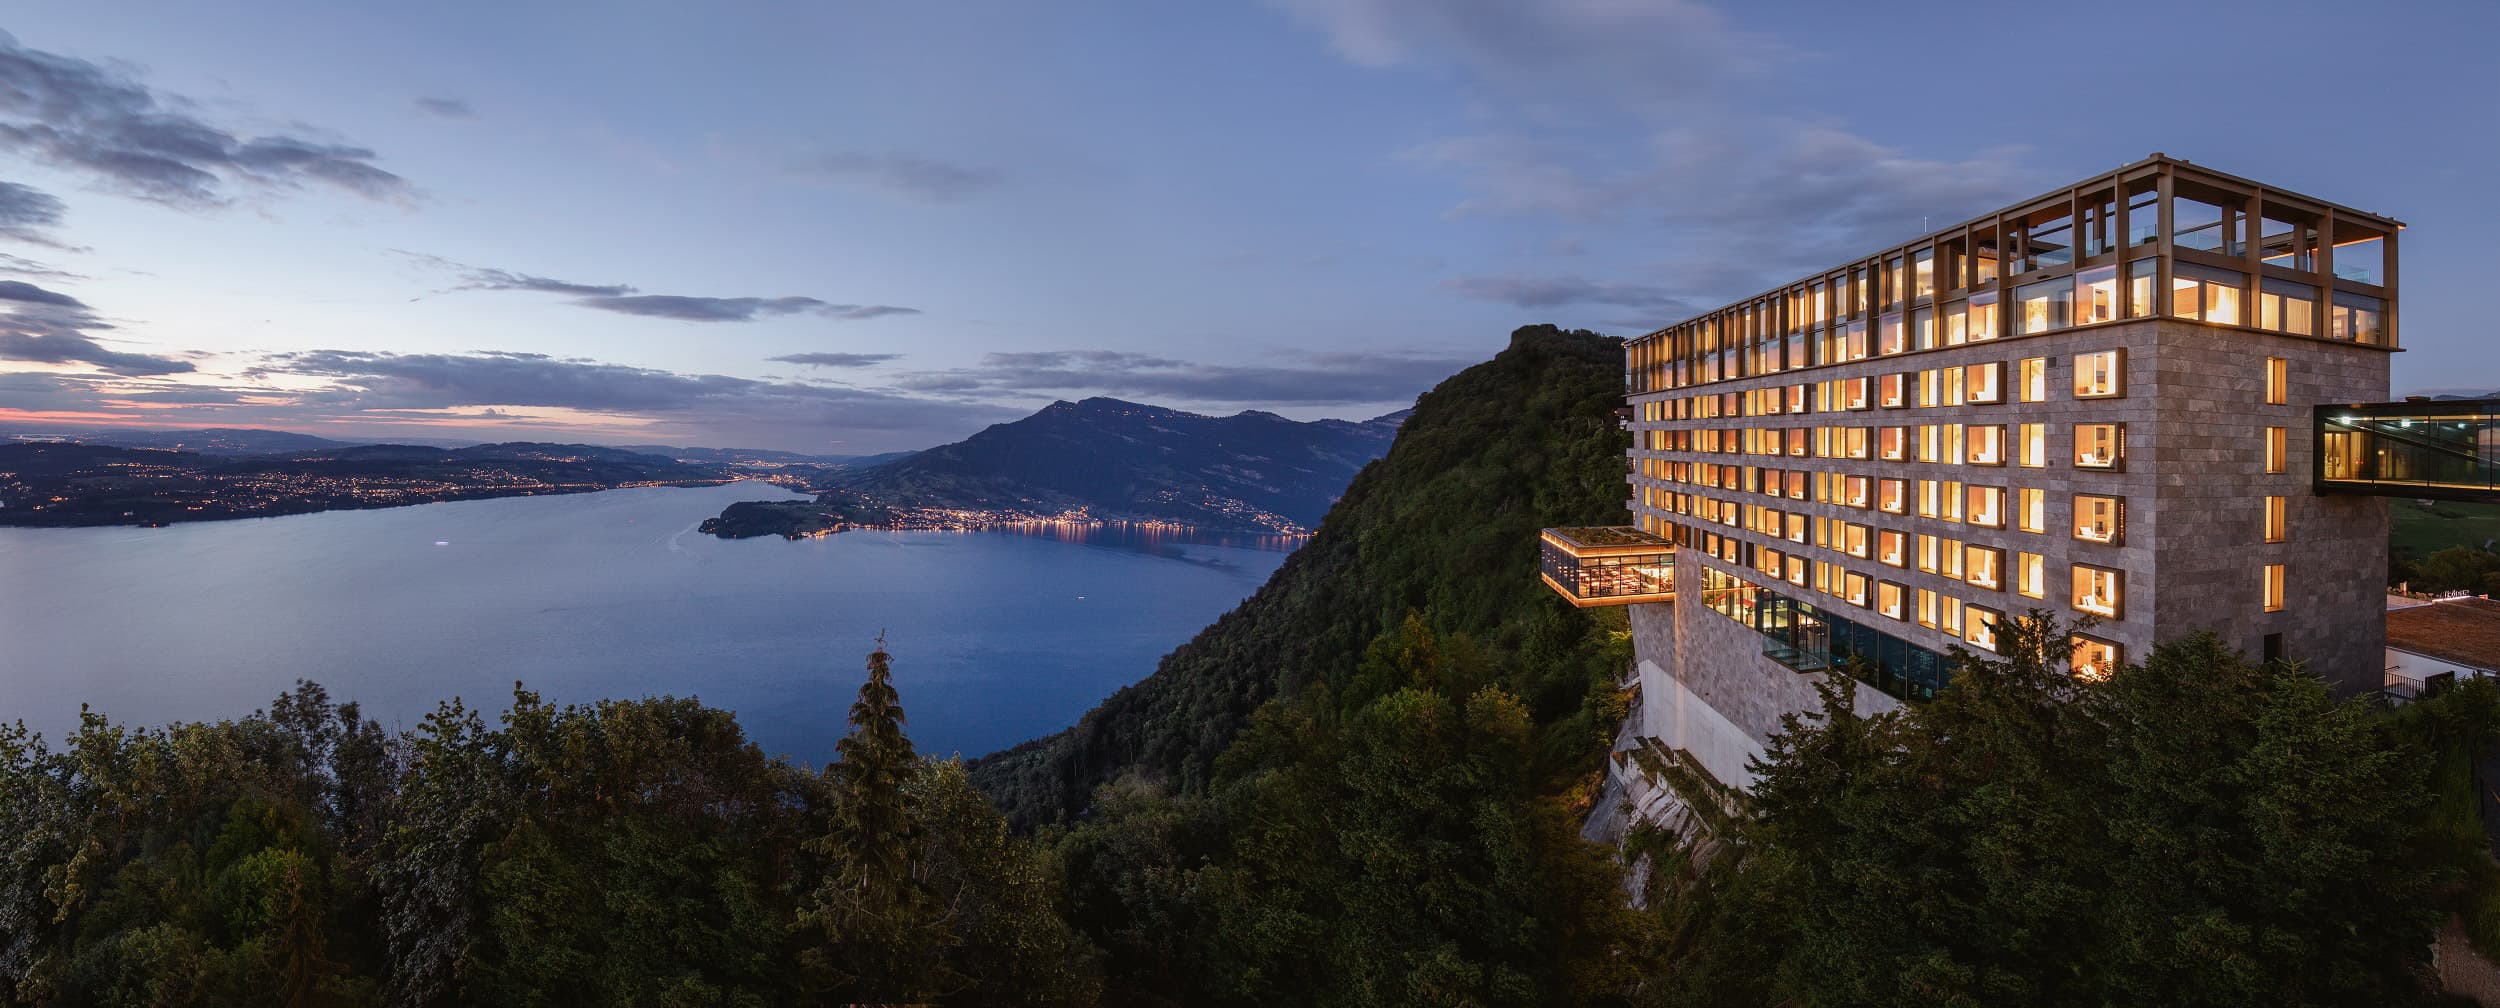 Swiss Deluxe Hotels Buergenstock Resort Lake Lucerne Bürgenstock Hotel & Alpine Spa The Contemporary Exterior